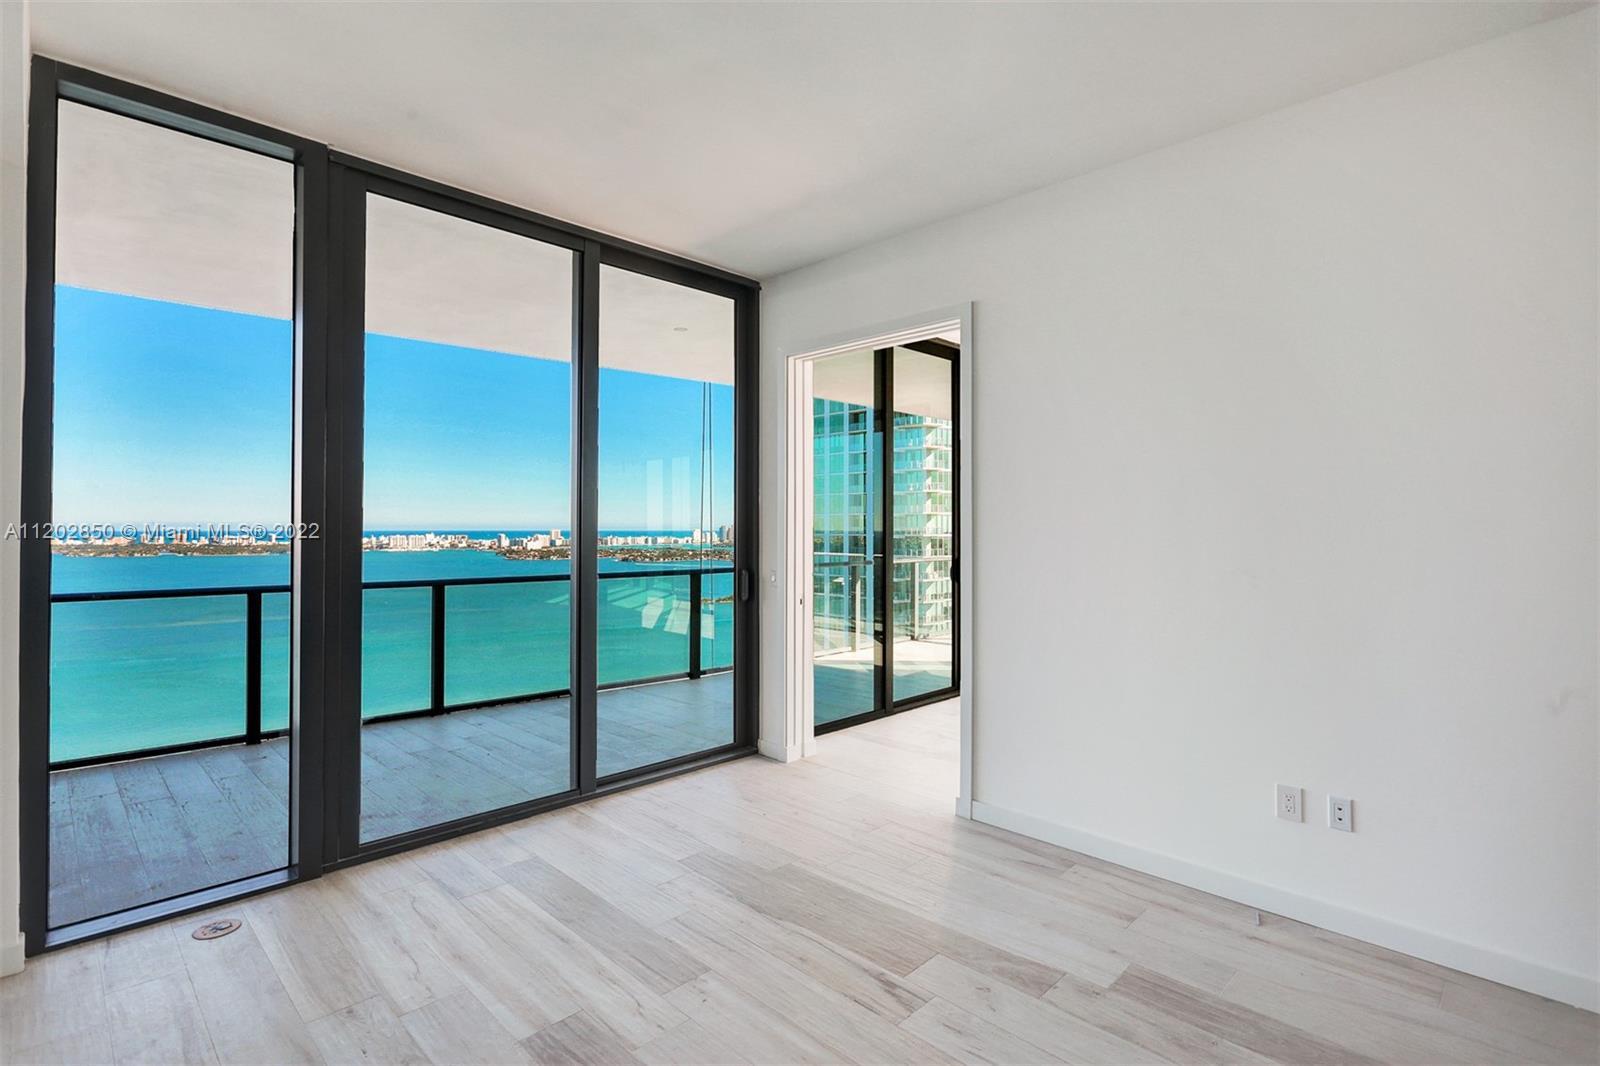 Spacious 2 Bedrooms 3 full bathrooms apartment with panoramic views of the Biscayne Bay at the luxur